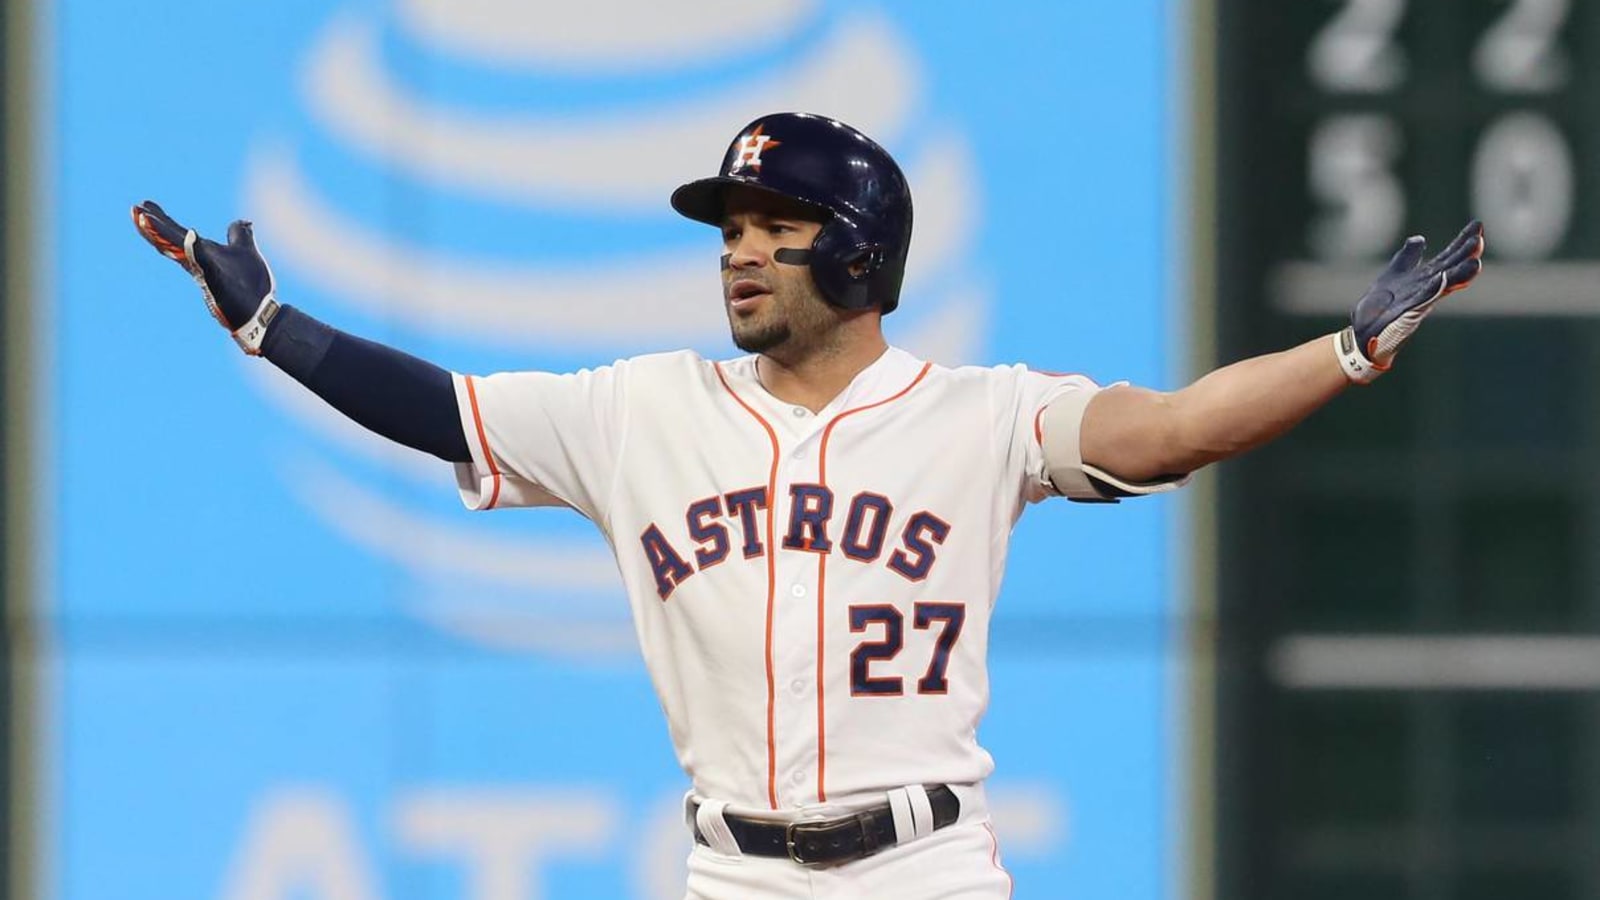 Jose Altuve admits being ‘upset’ over interference call